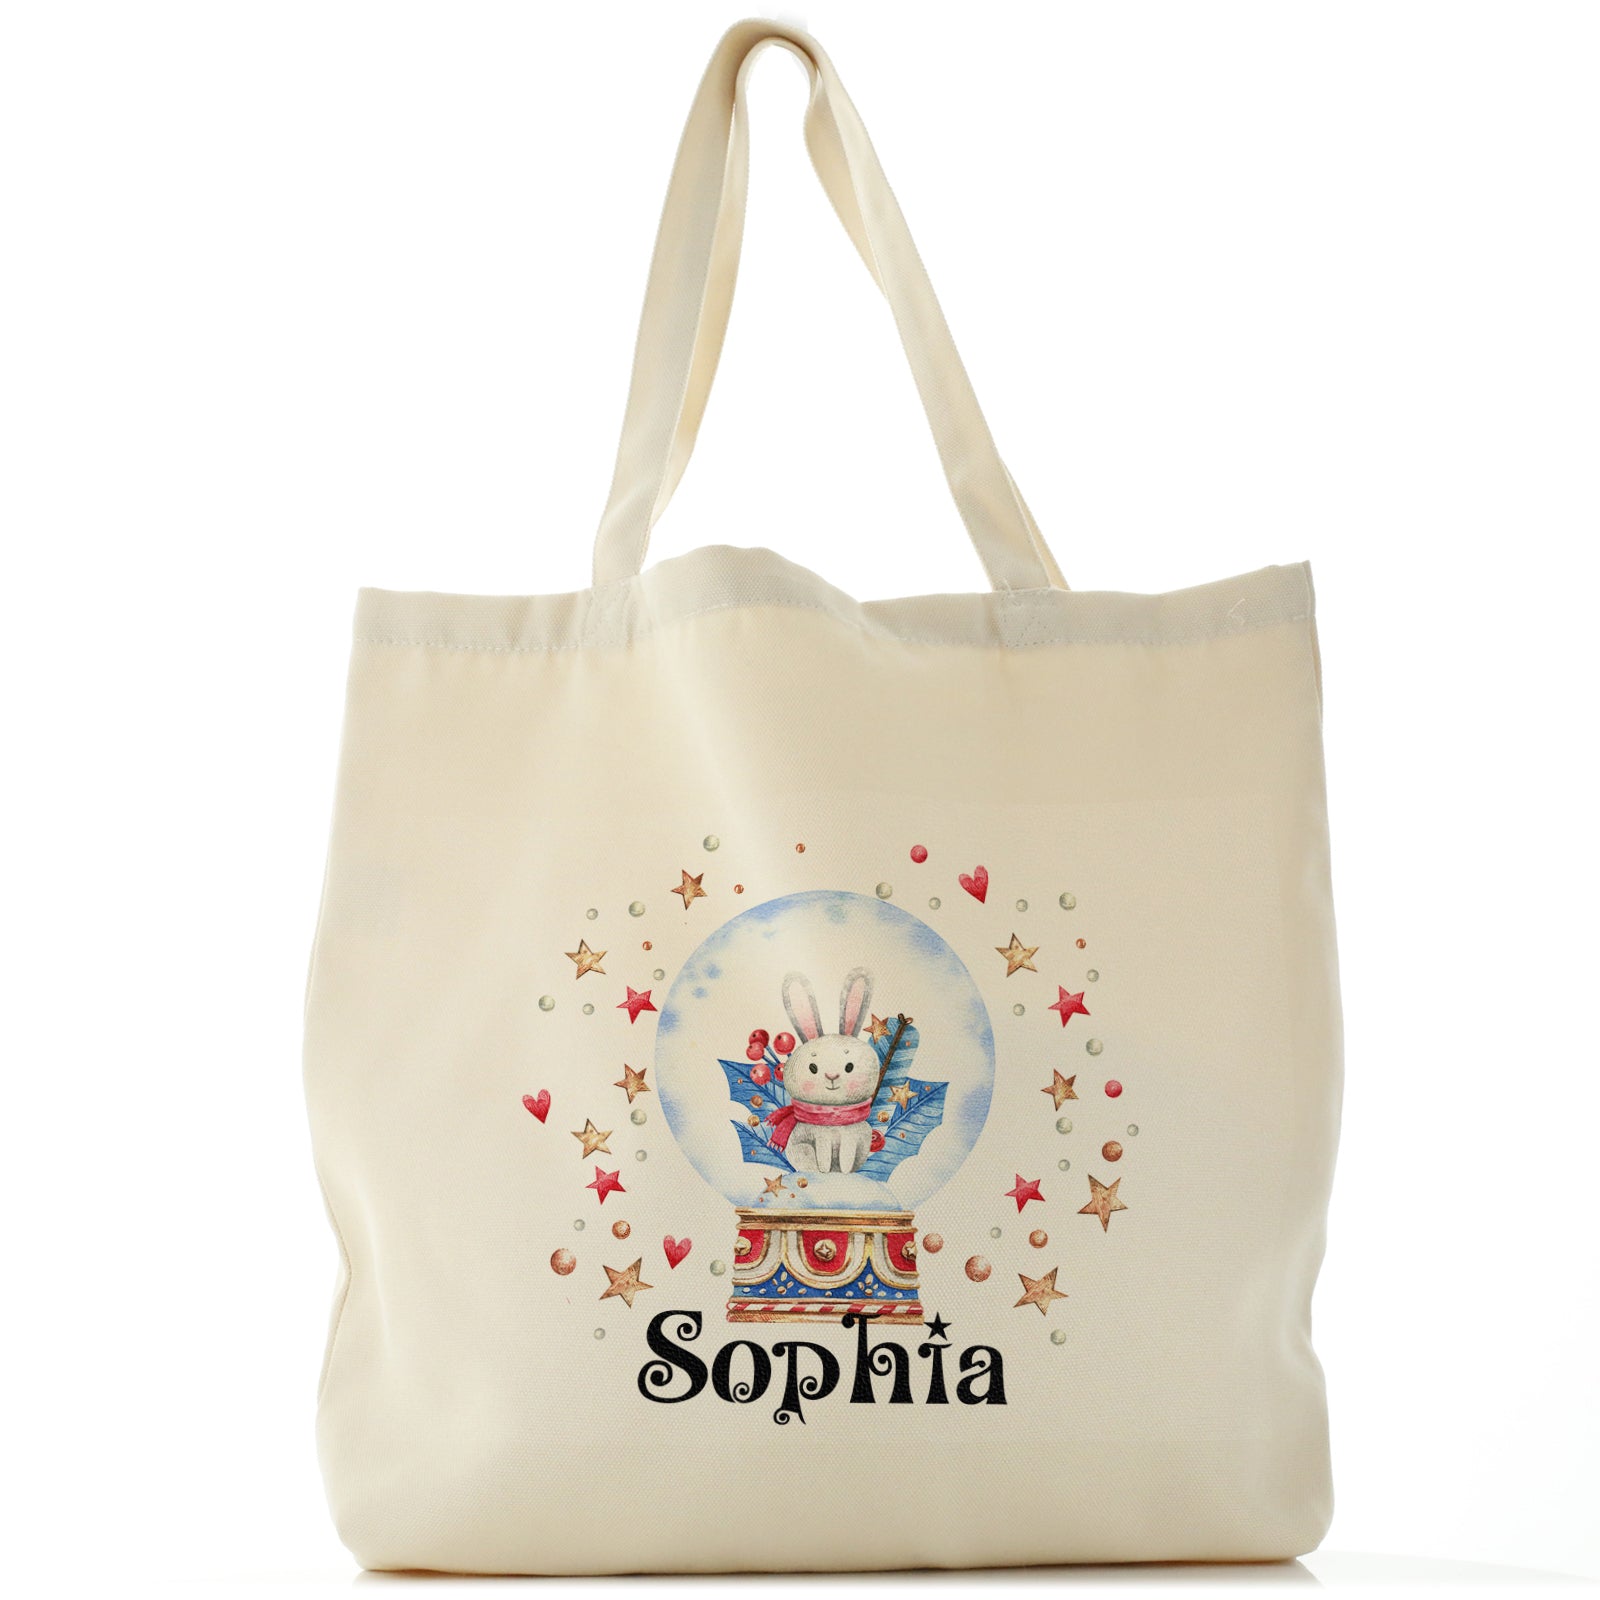 Personalised Canvas Tote Bag with Christmas Text and Rabbit Snow Globe